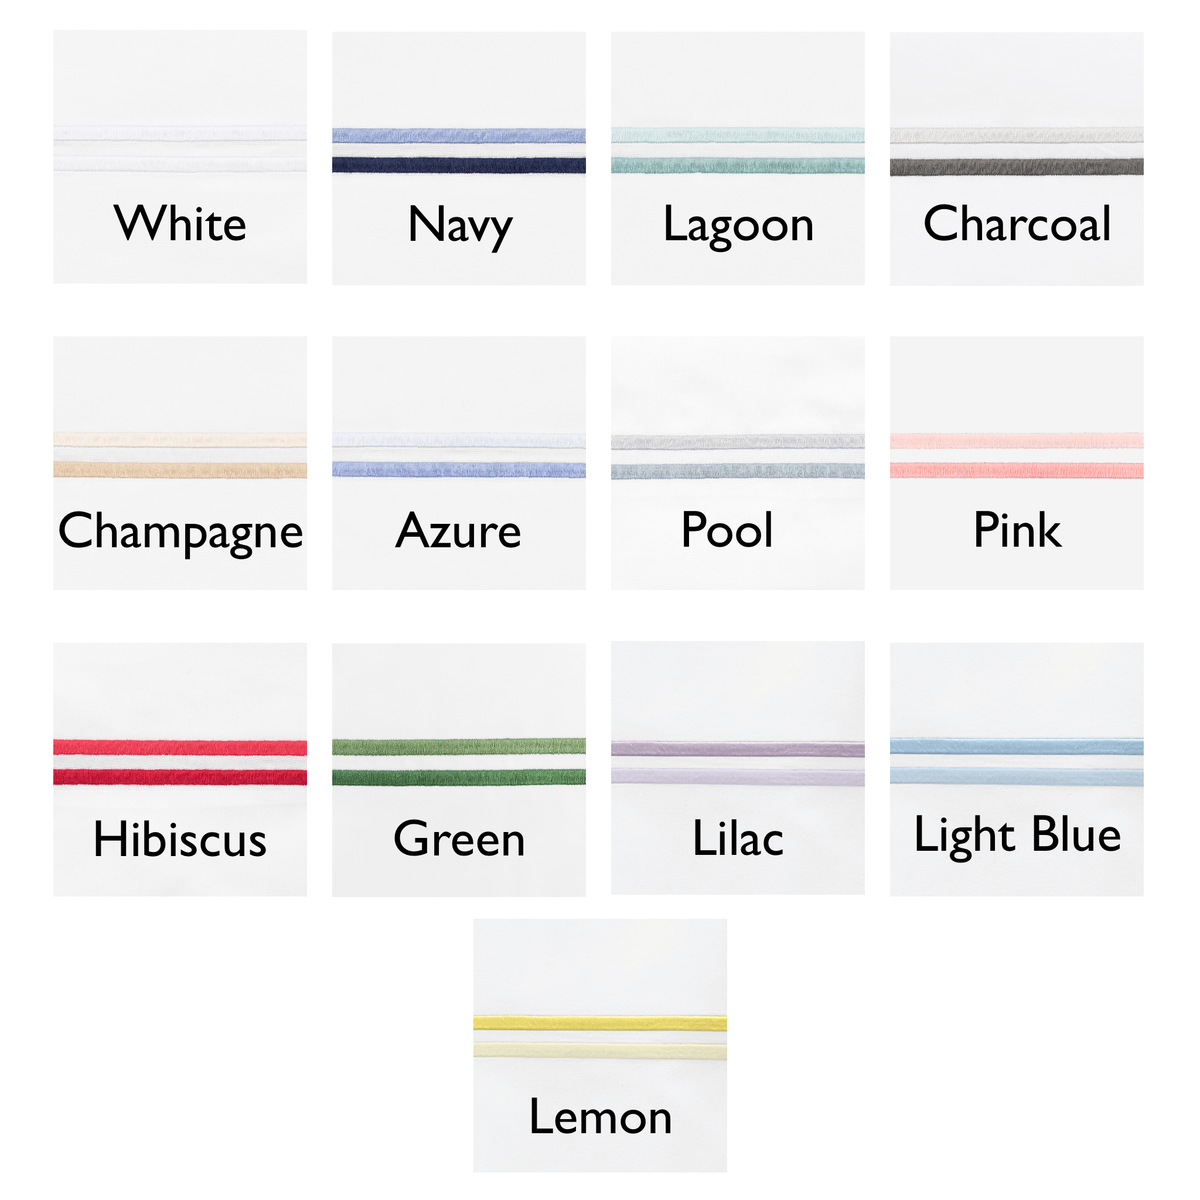 Compilation of All Colors of Swatch Samples of Matouk Essex Bedding